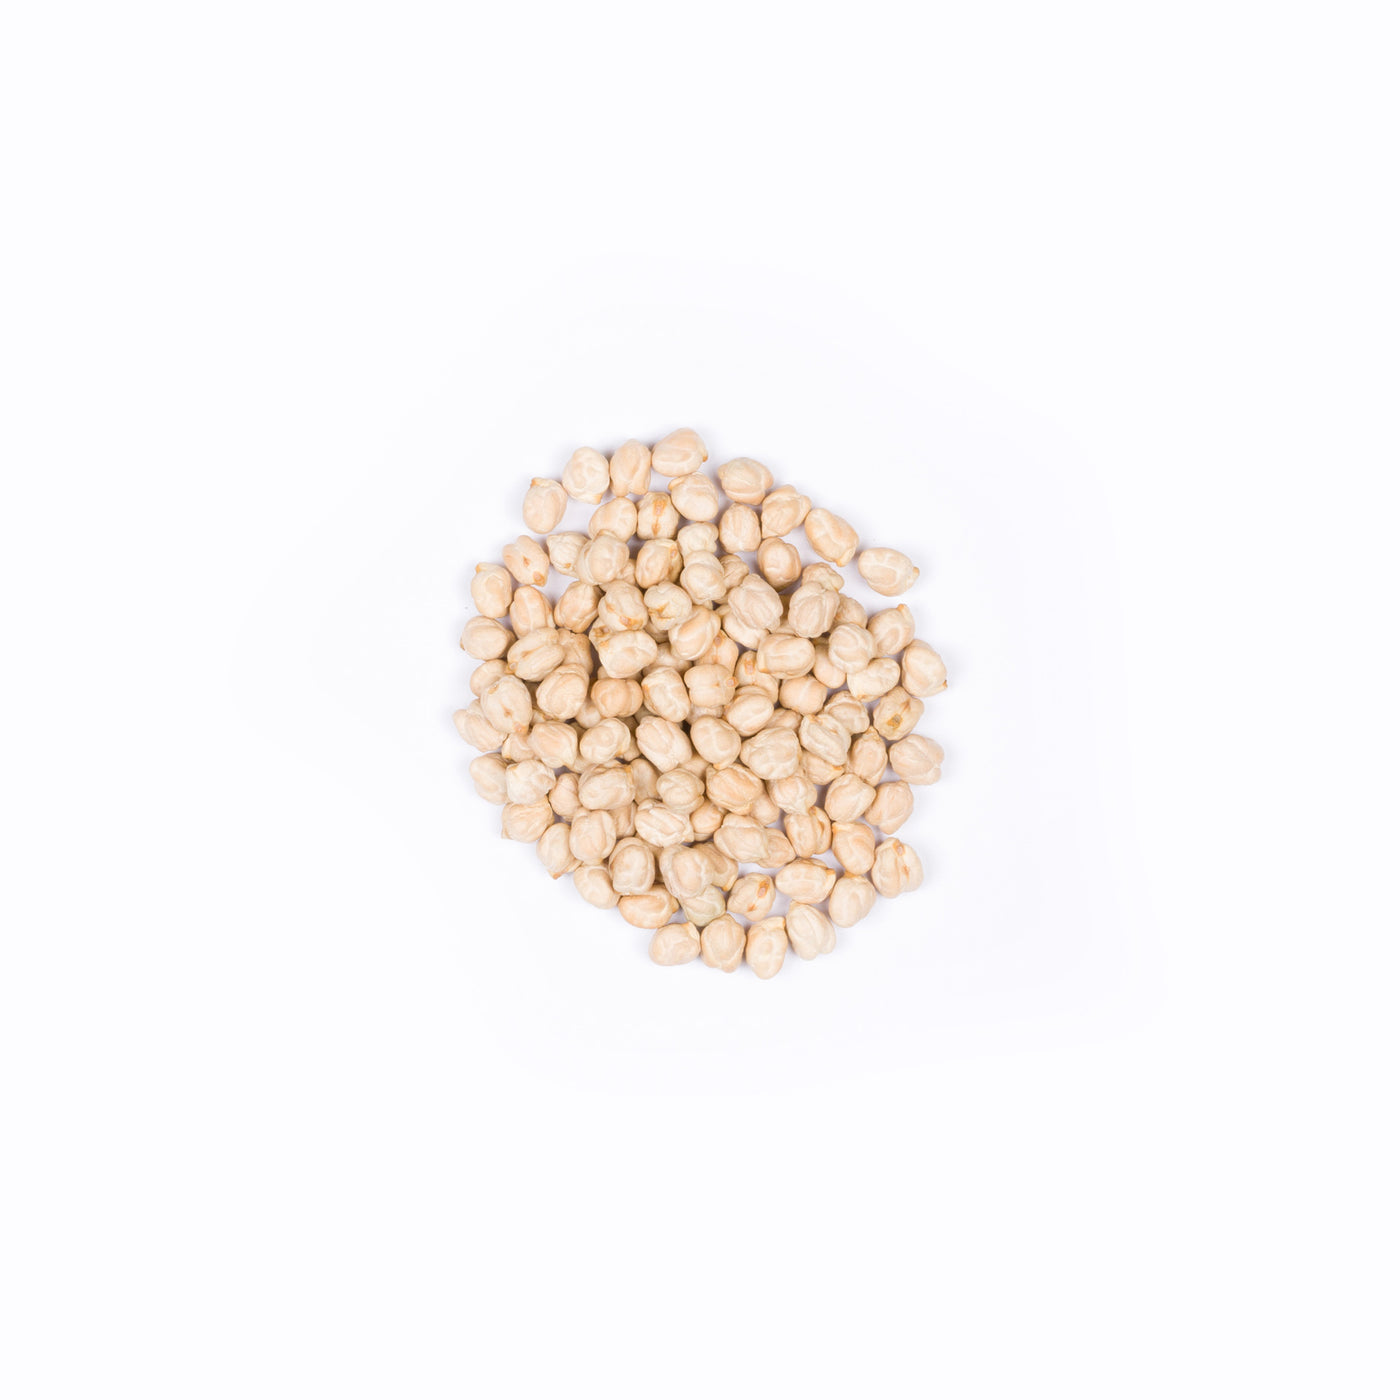 Mexican chickpeas